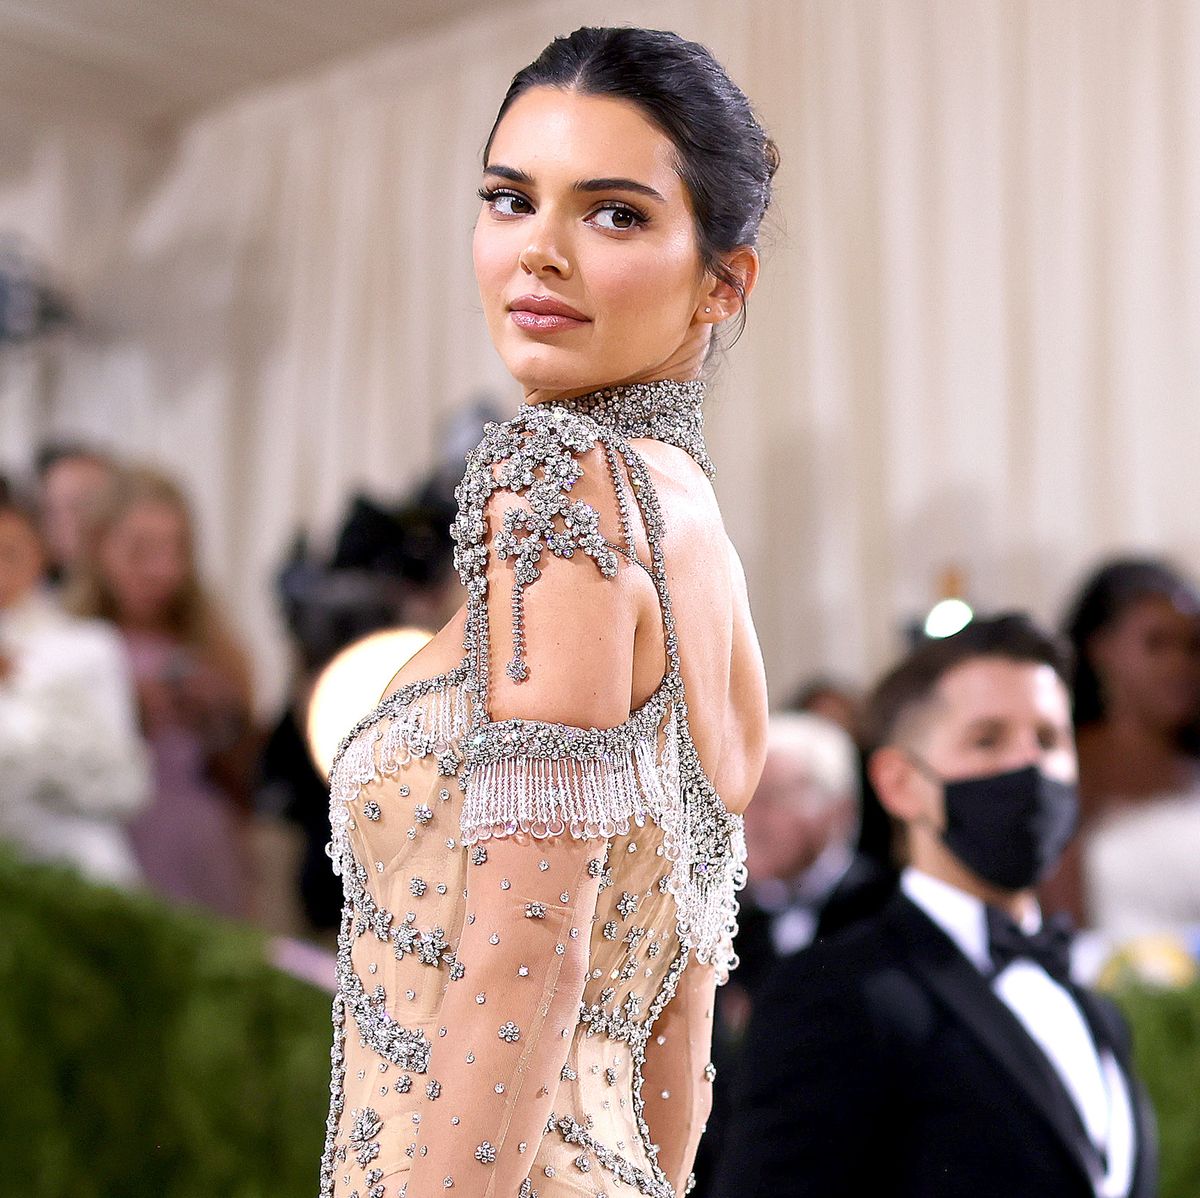 Kendall Jenner channelled Audrey Hepburn at the Met Gala